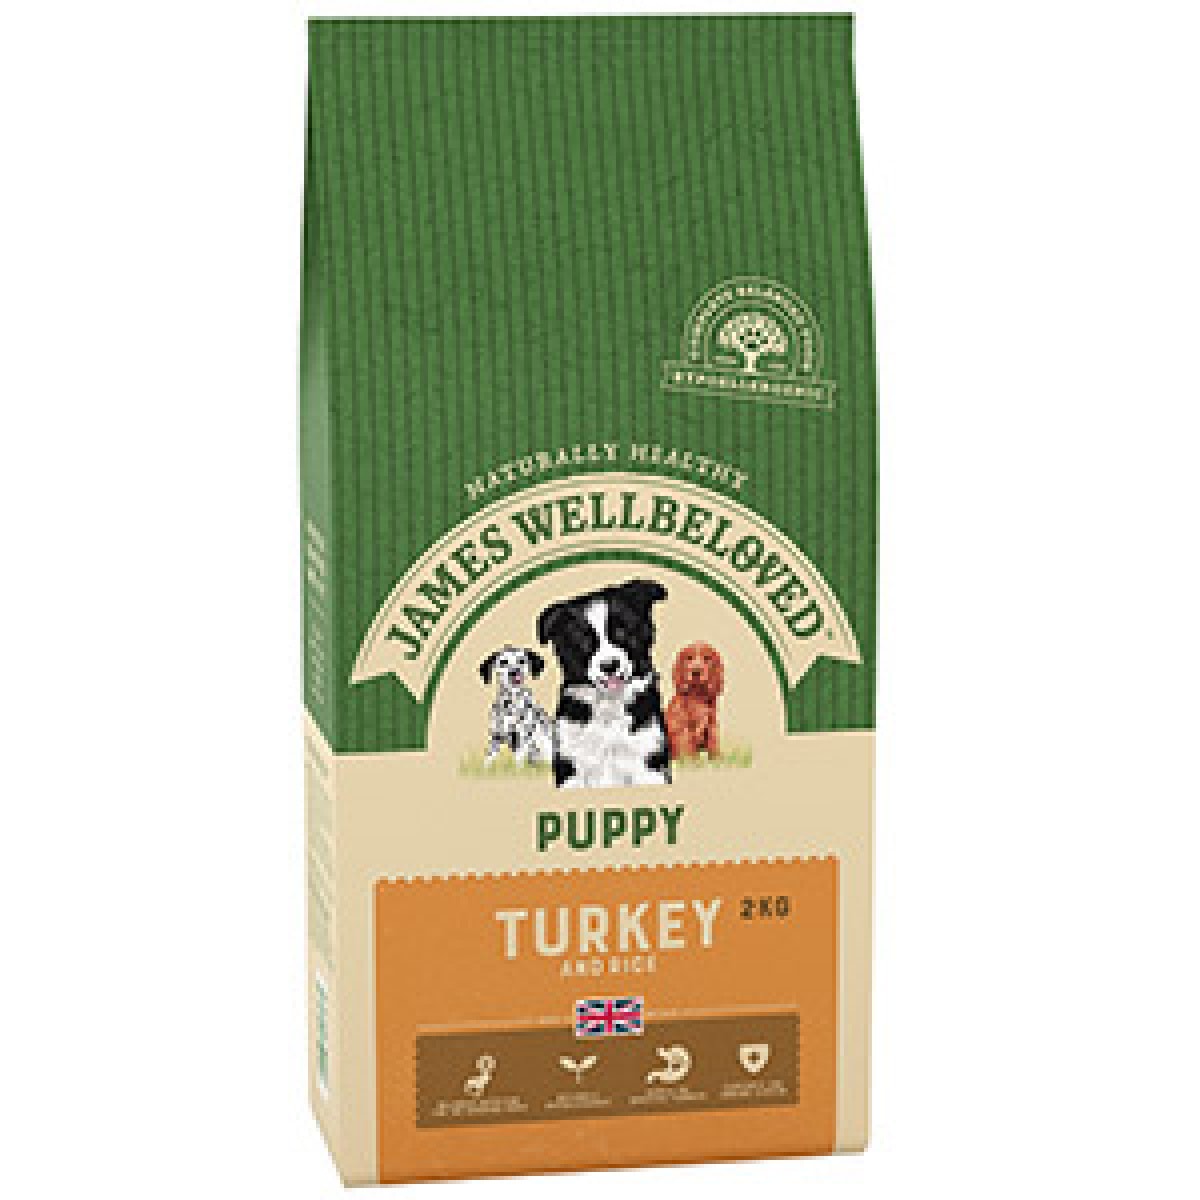 James Wellbeloved – Turkey Puppy 2kg – Pawfect Supplies Ltd Product Image